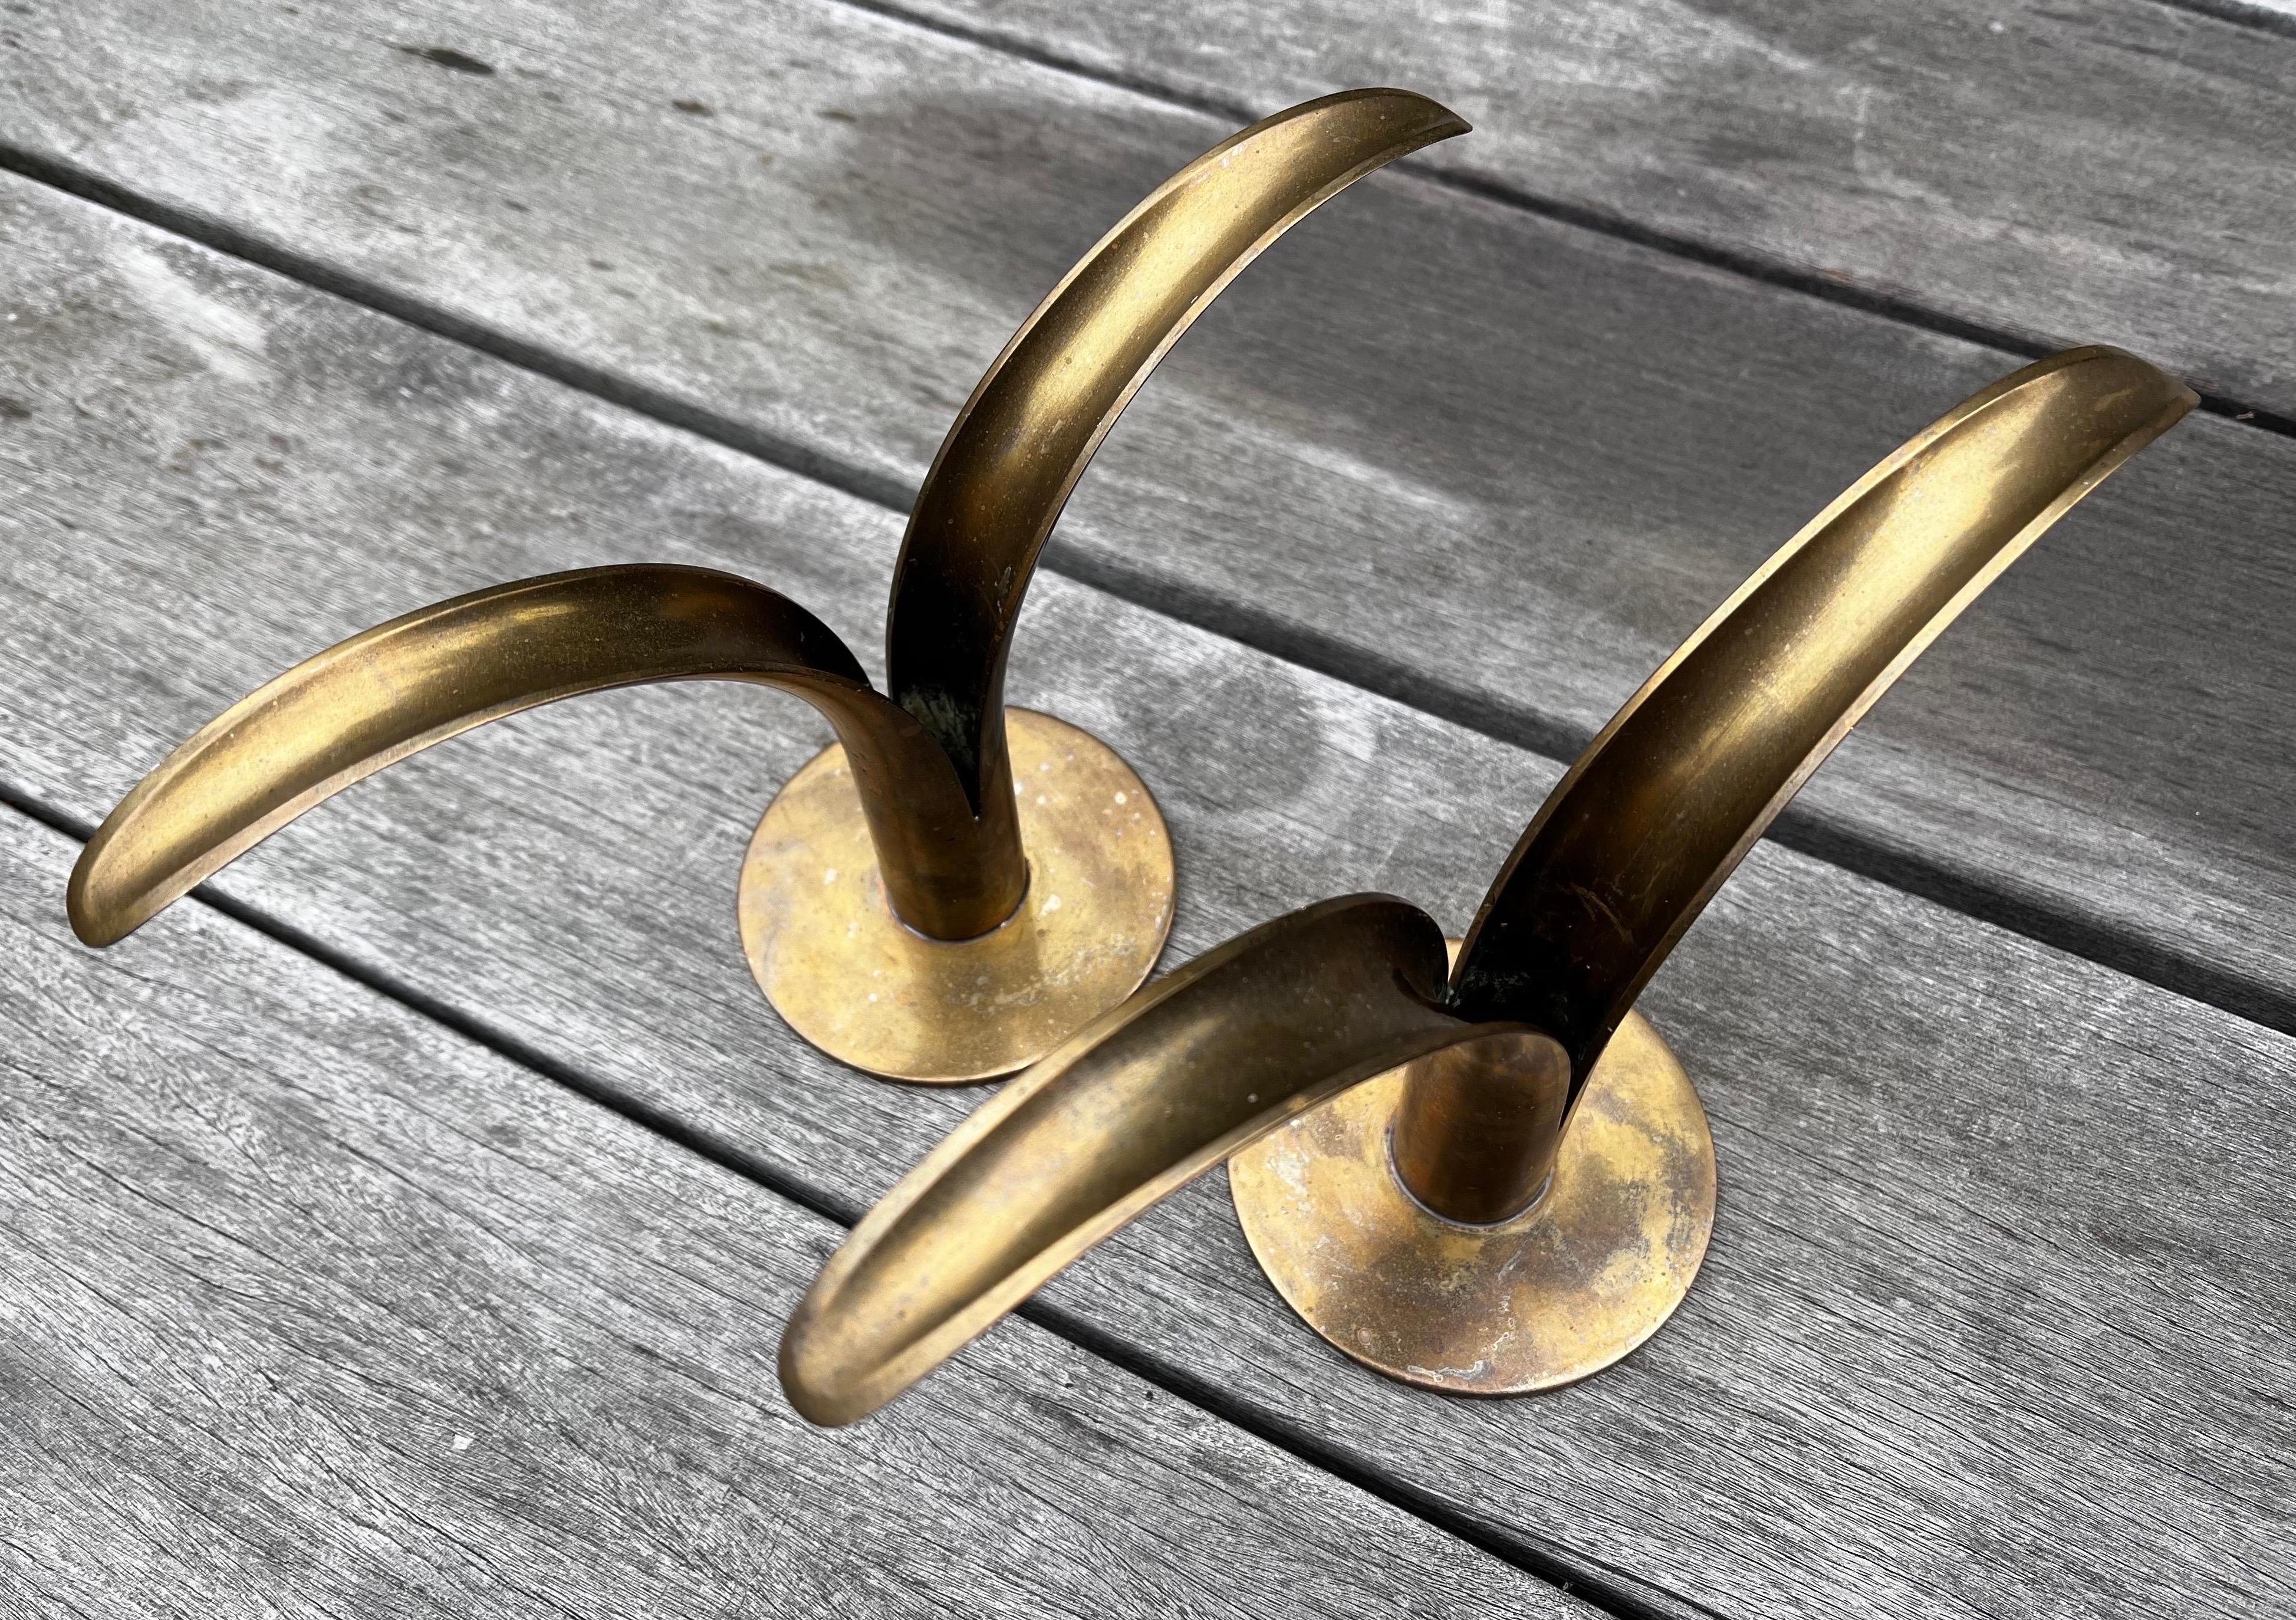 Pair of Mid-Century Modern brass candleholders 
by Ivar Alenius Bjork for Ystad Metal. 
Made in Sweden circa 1950s. 
Labeled on the bottom.
In very good original condition. 
Have not been polished.


